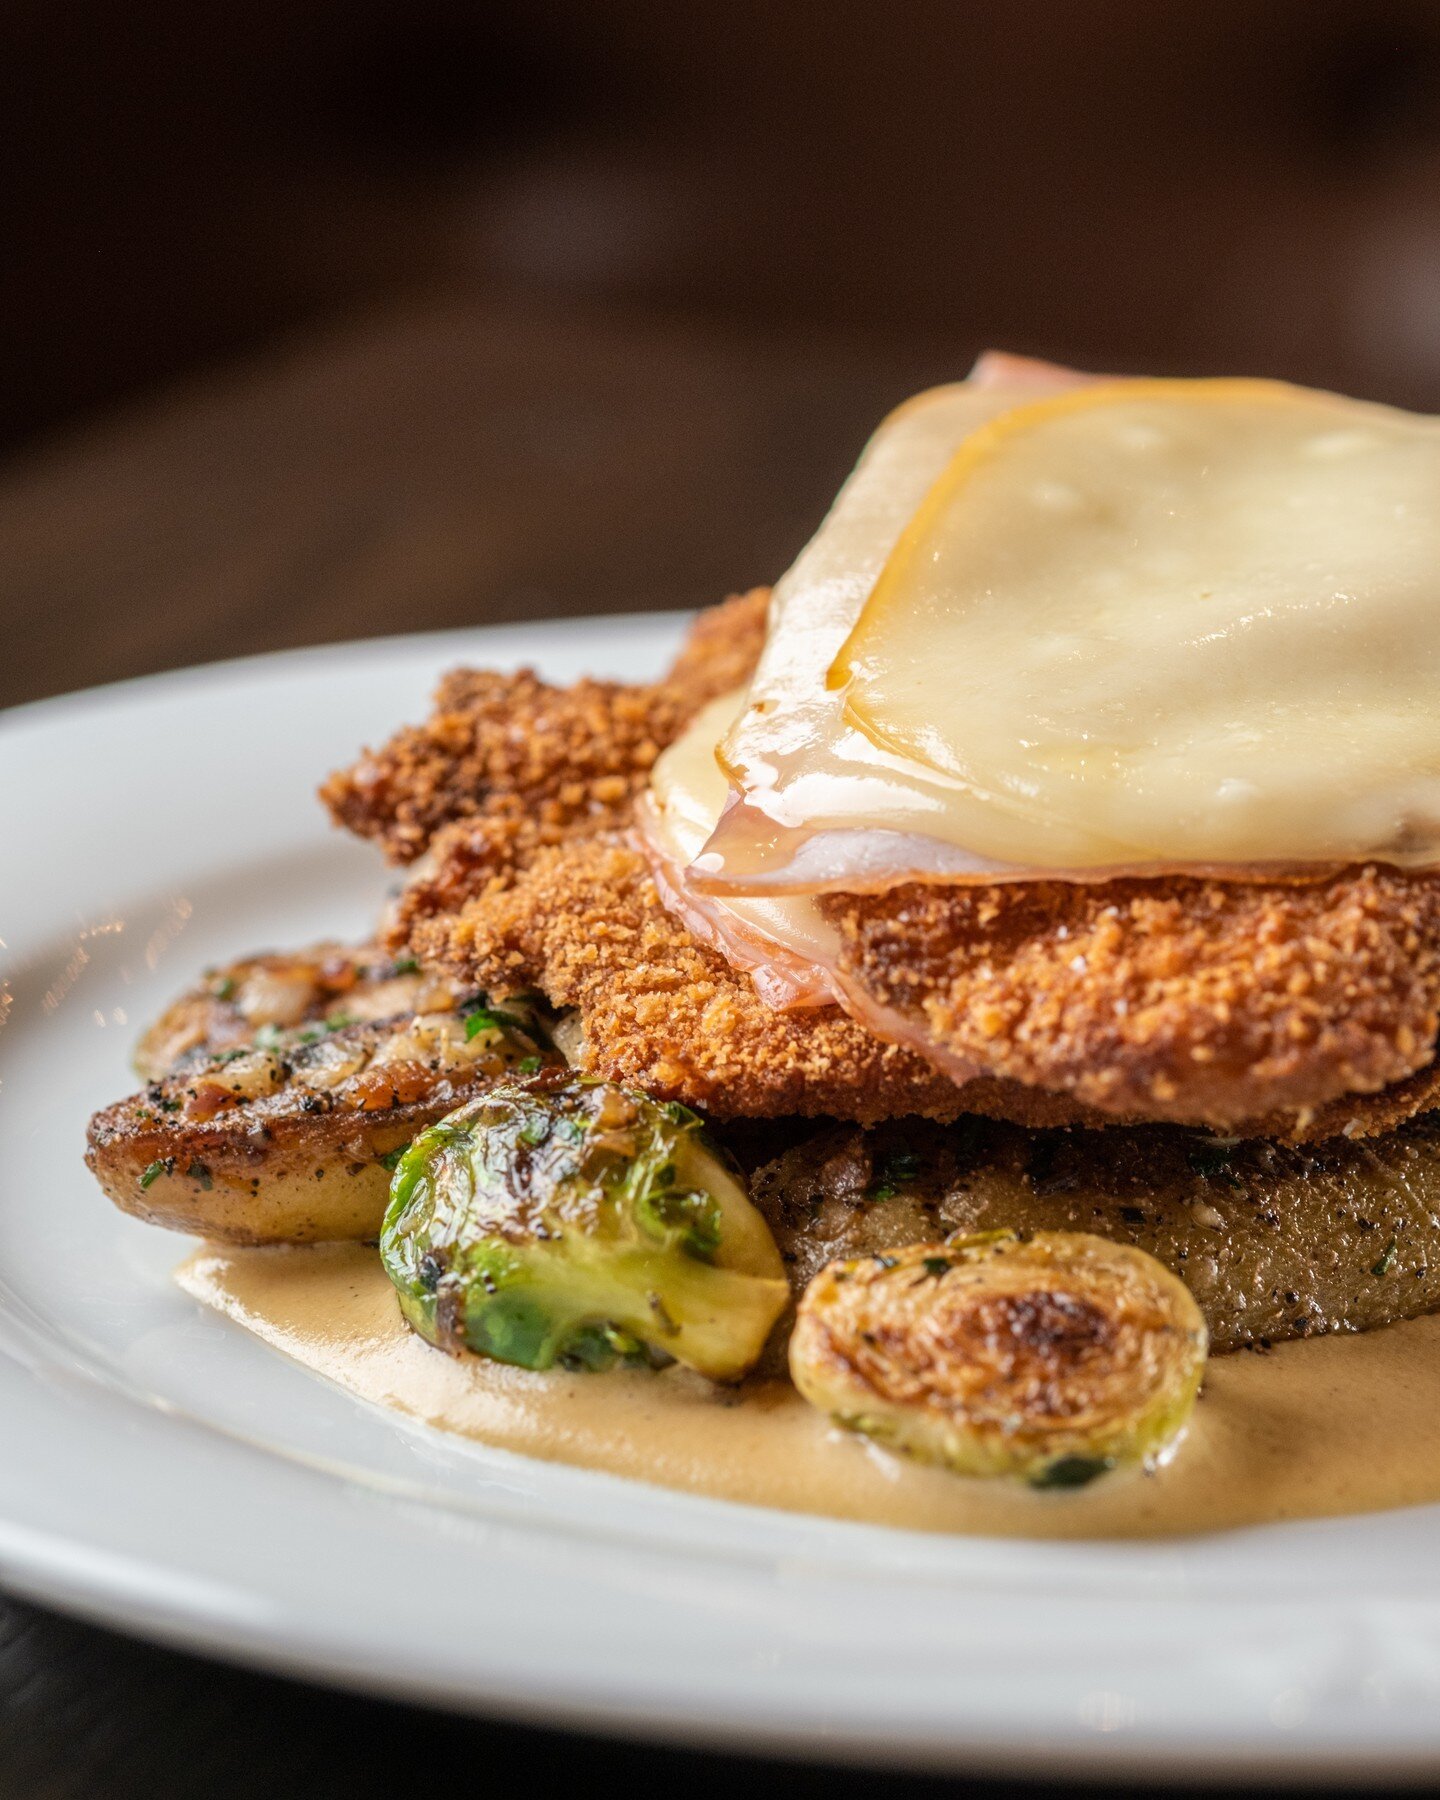 Hey foodies! Get ready to indulge in the ultimate comfort food experience with the Blackshop Schnitzel - a delicious dish featuring Black Forest Ham, Smoked Provolone, Fingerling Potatoes, Brussel Sprouts, and Dijon Cream. This perfectly balanced mea